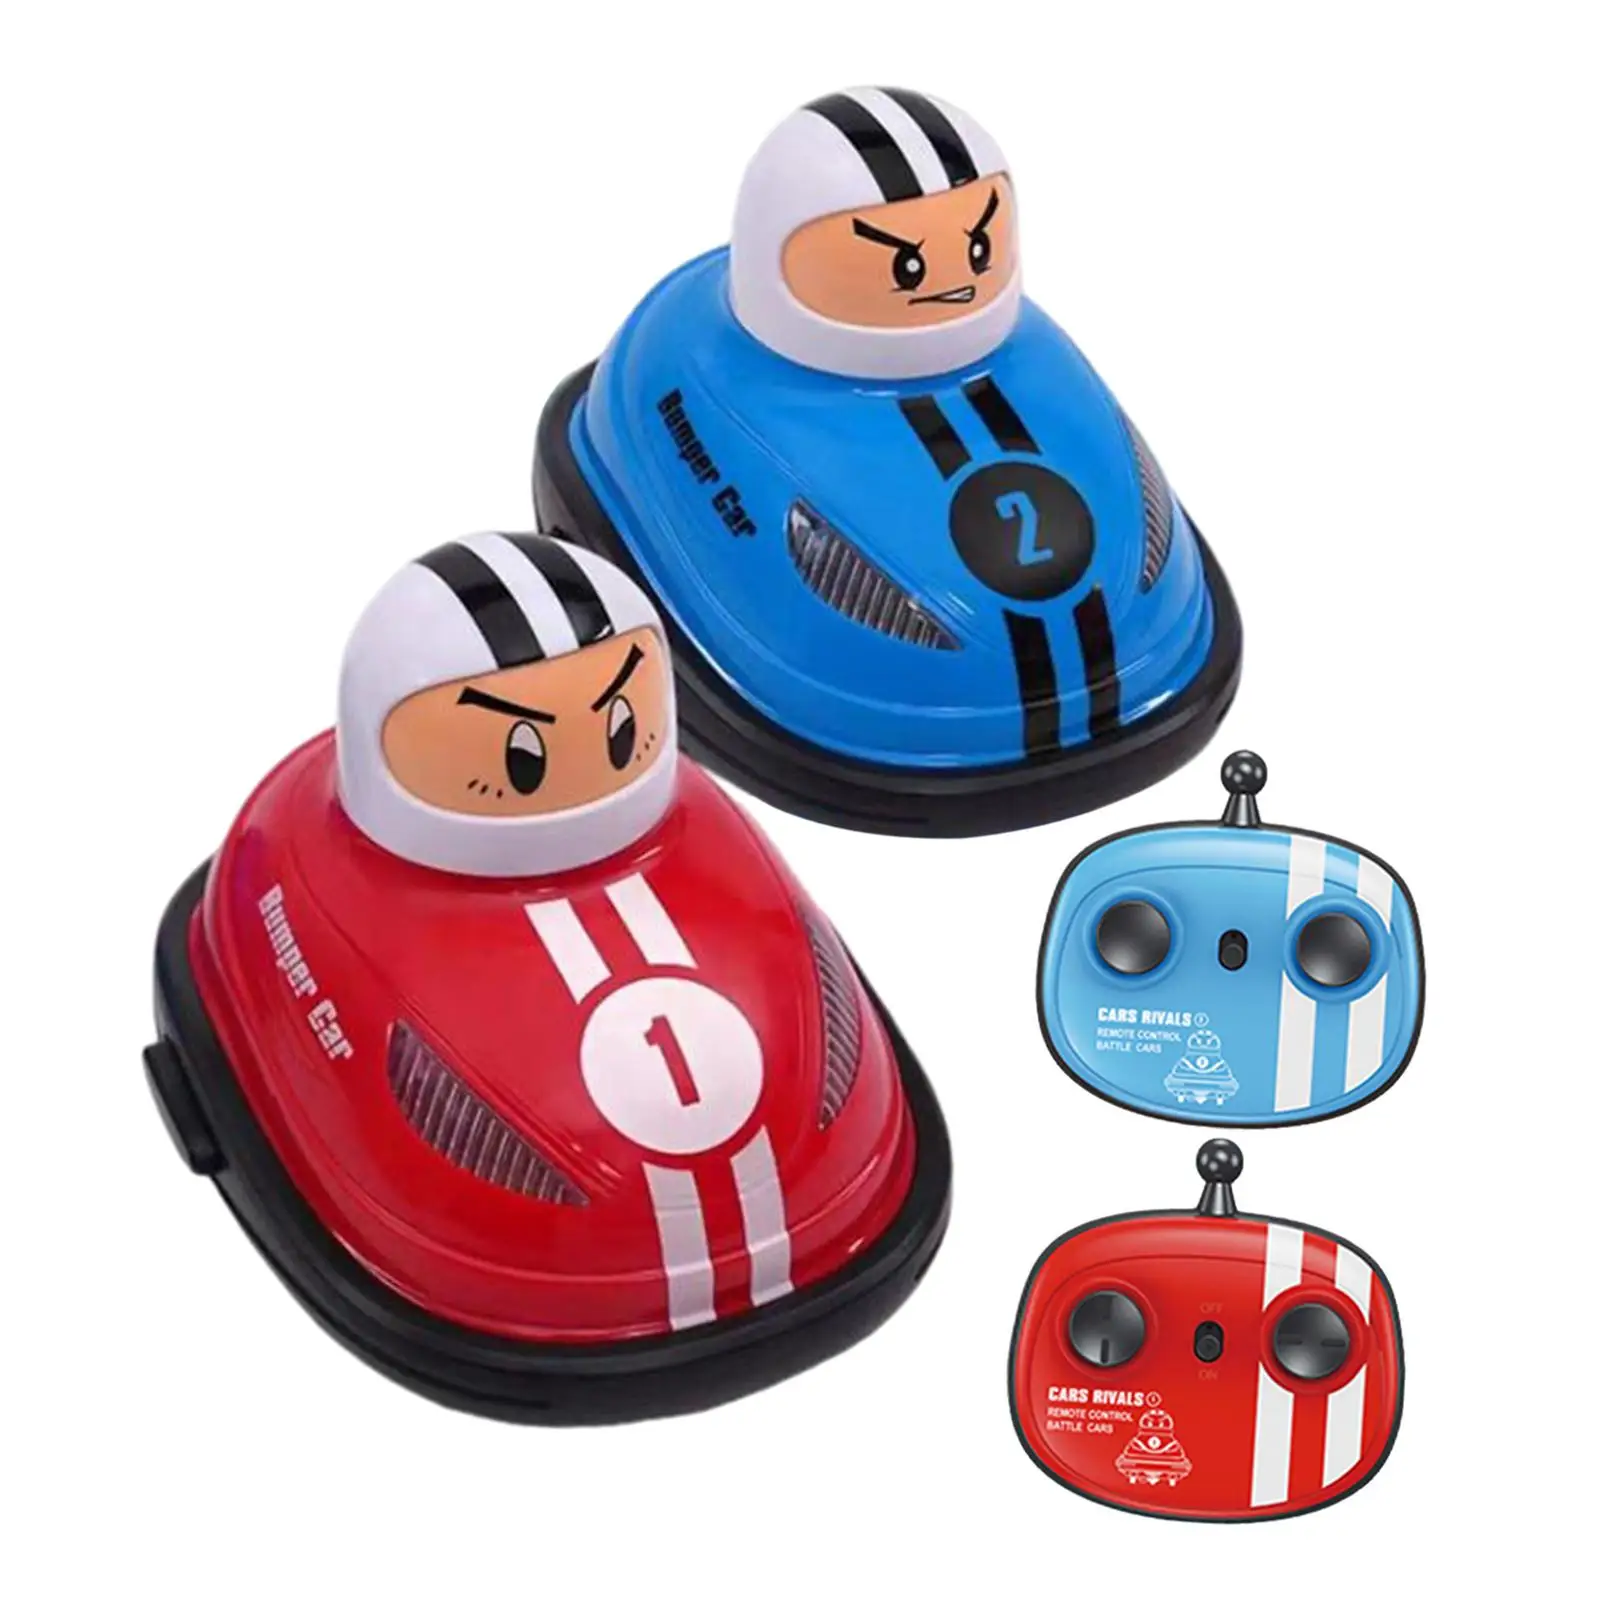 2 Player Head to Head Battle Sturdy Simple to Control RC Speed Bumper Cars for Teens Ages 6 and up Kids Children Valentine`s Day